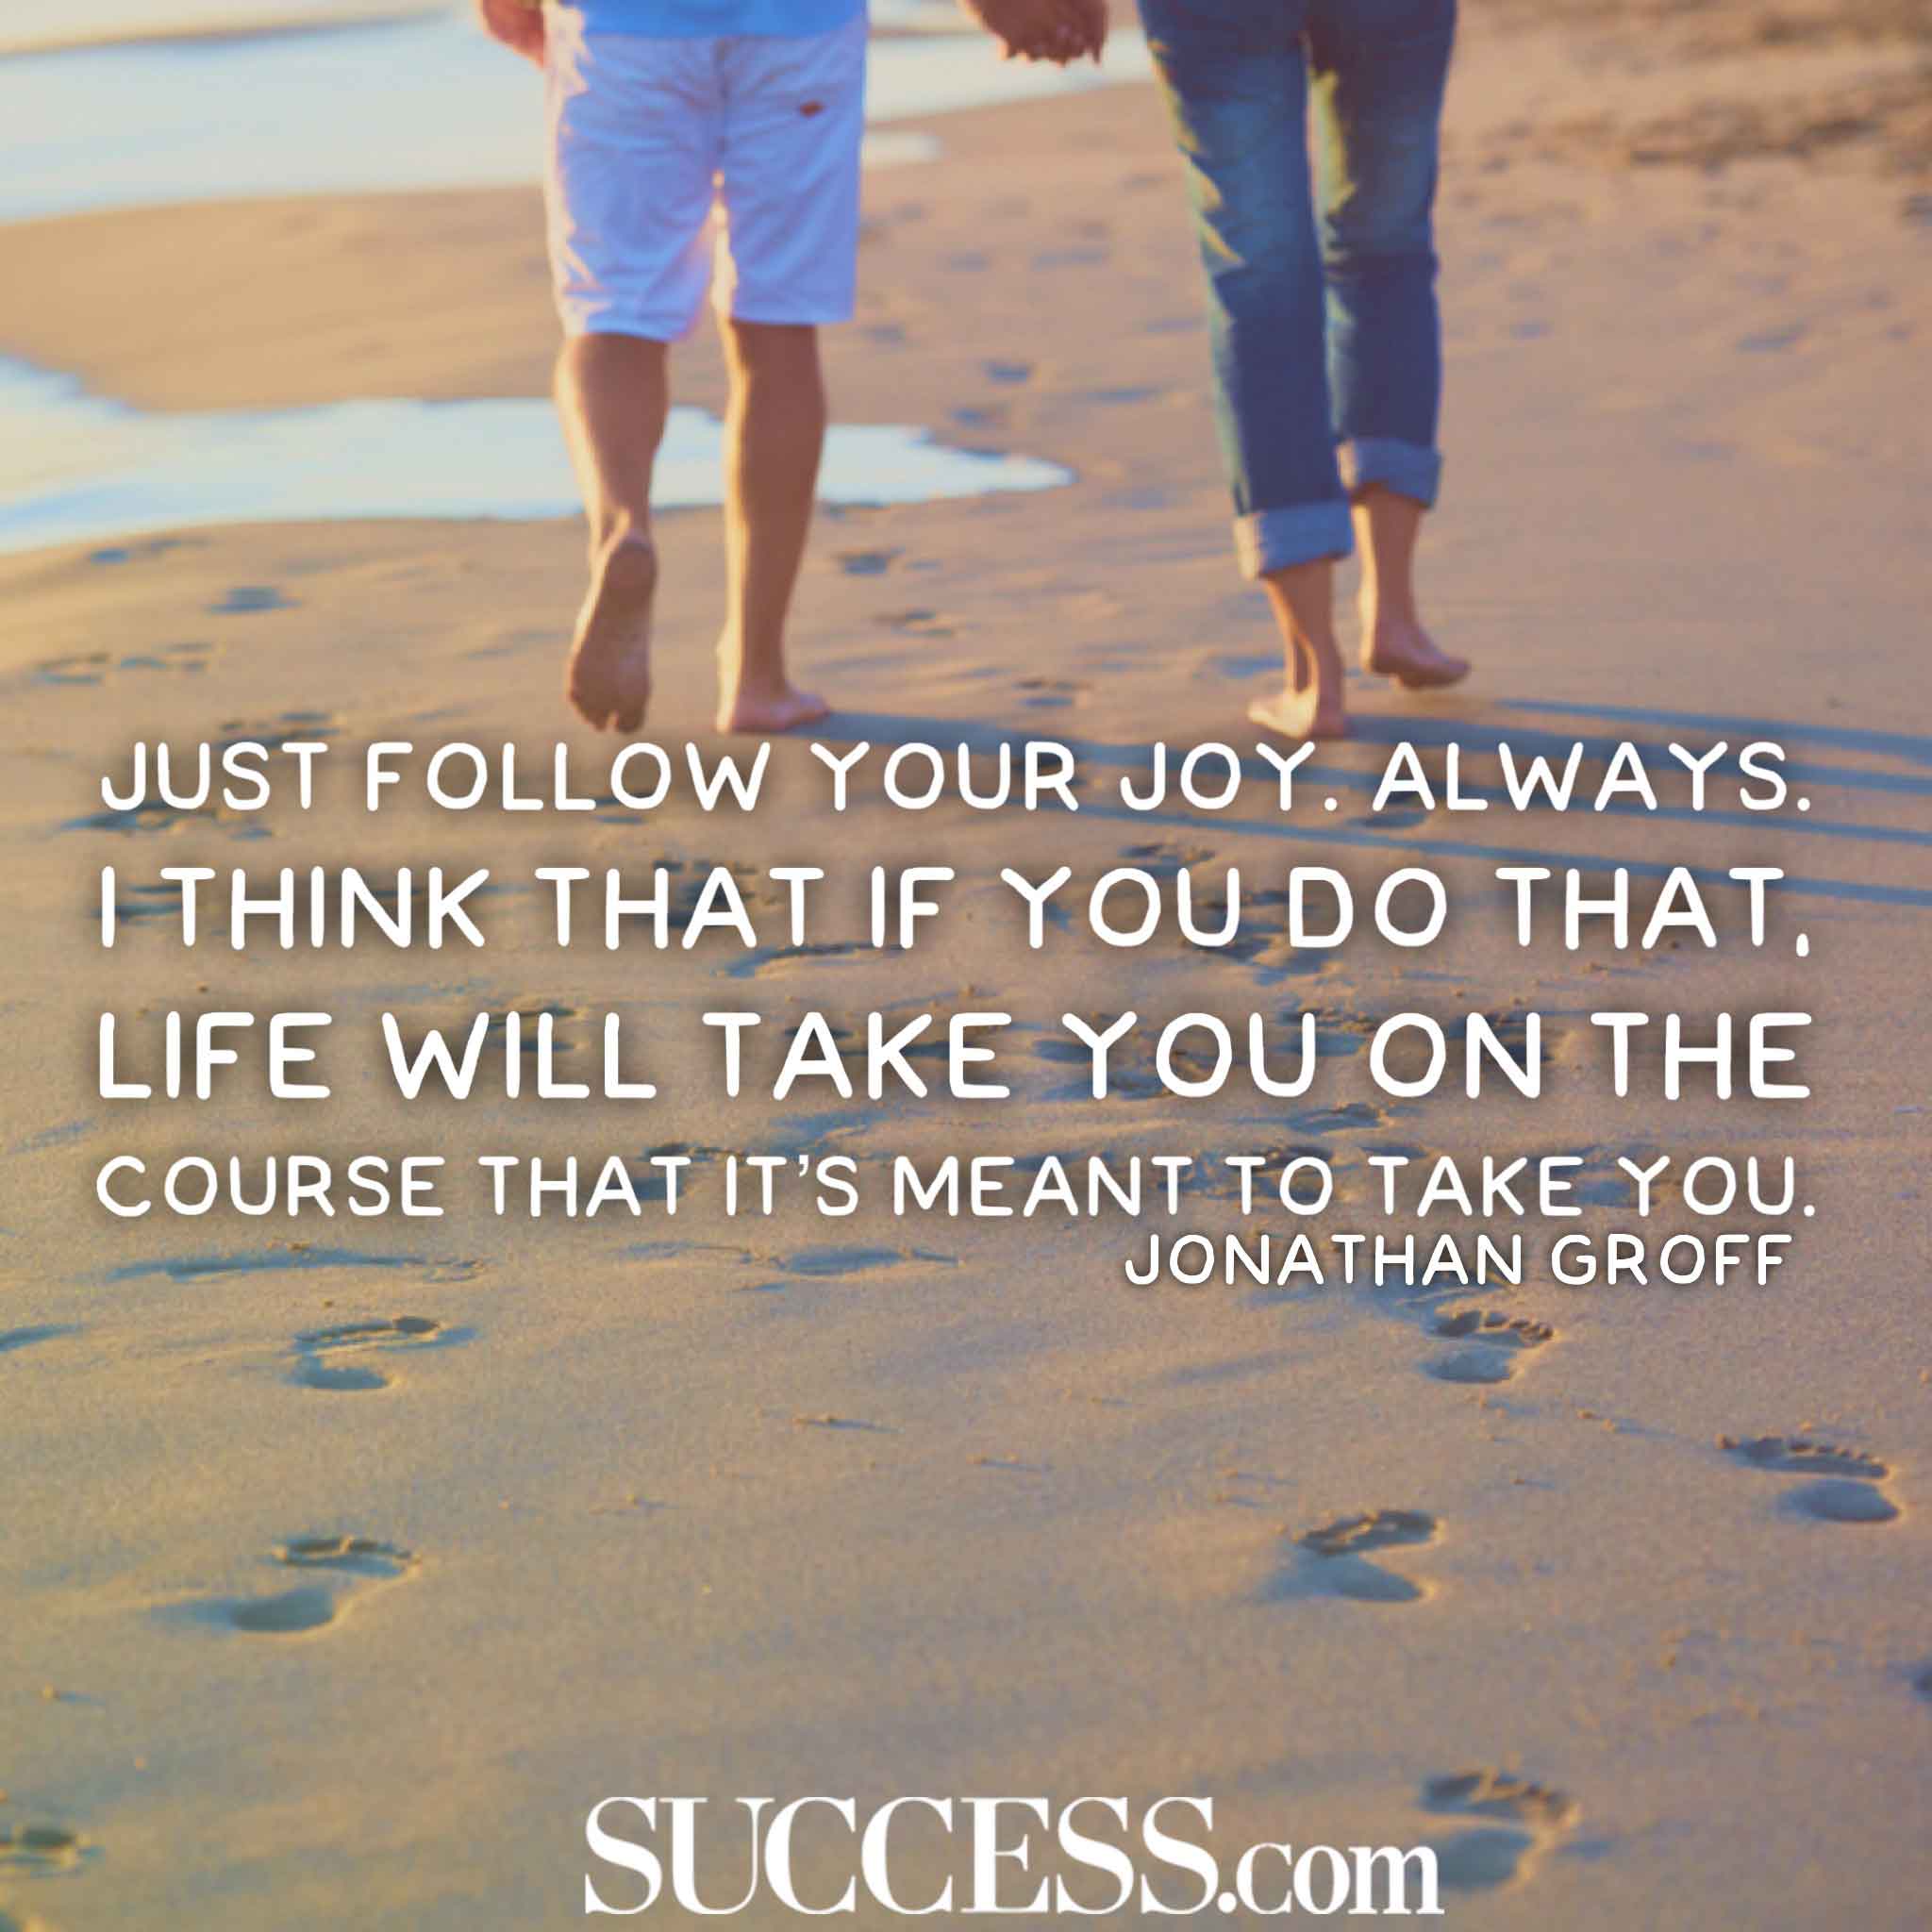 15 Inspiring Quotes to Help You Find Joy